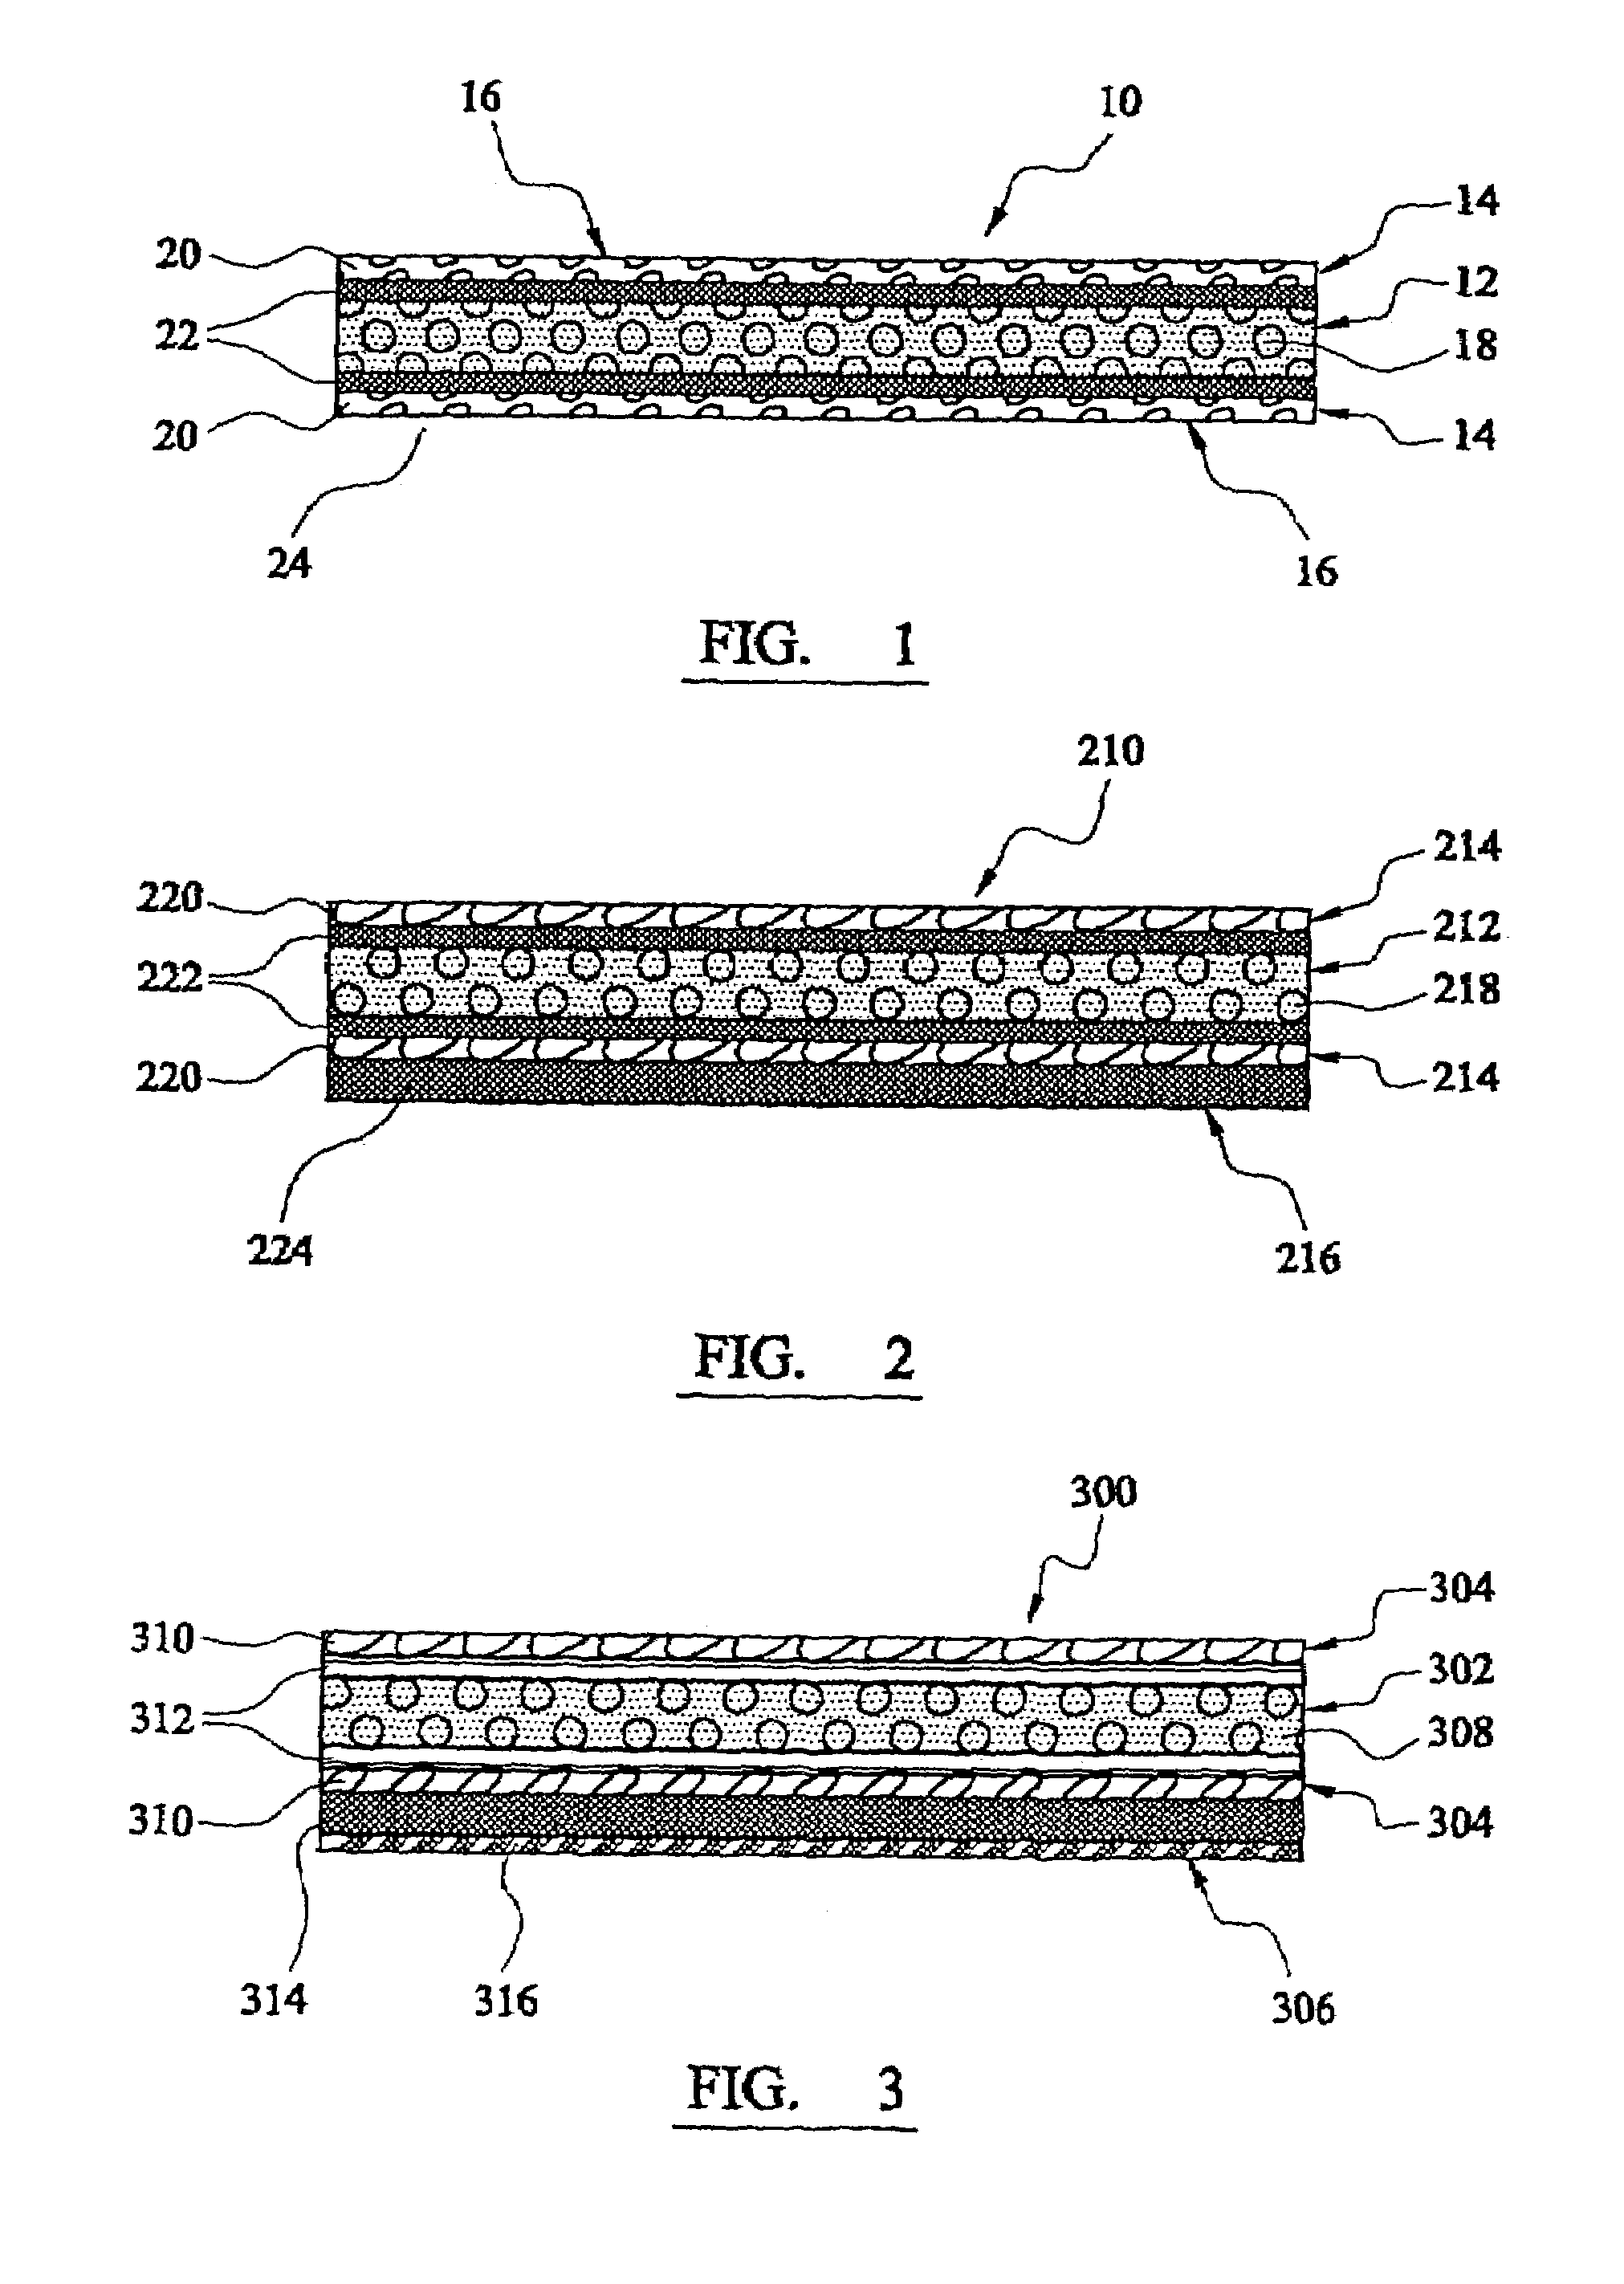 Sheet moulding compound (SMC) with ventilating structure for entrapped gases